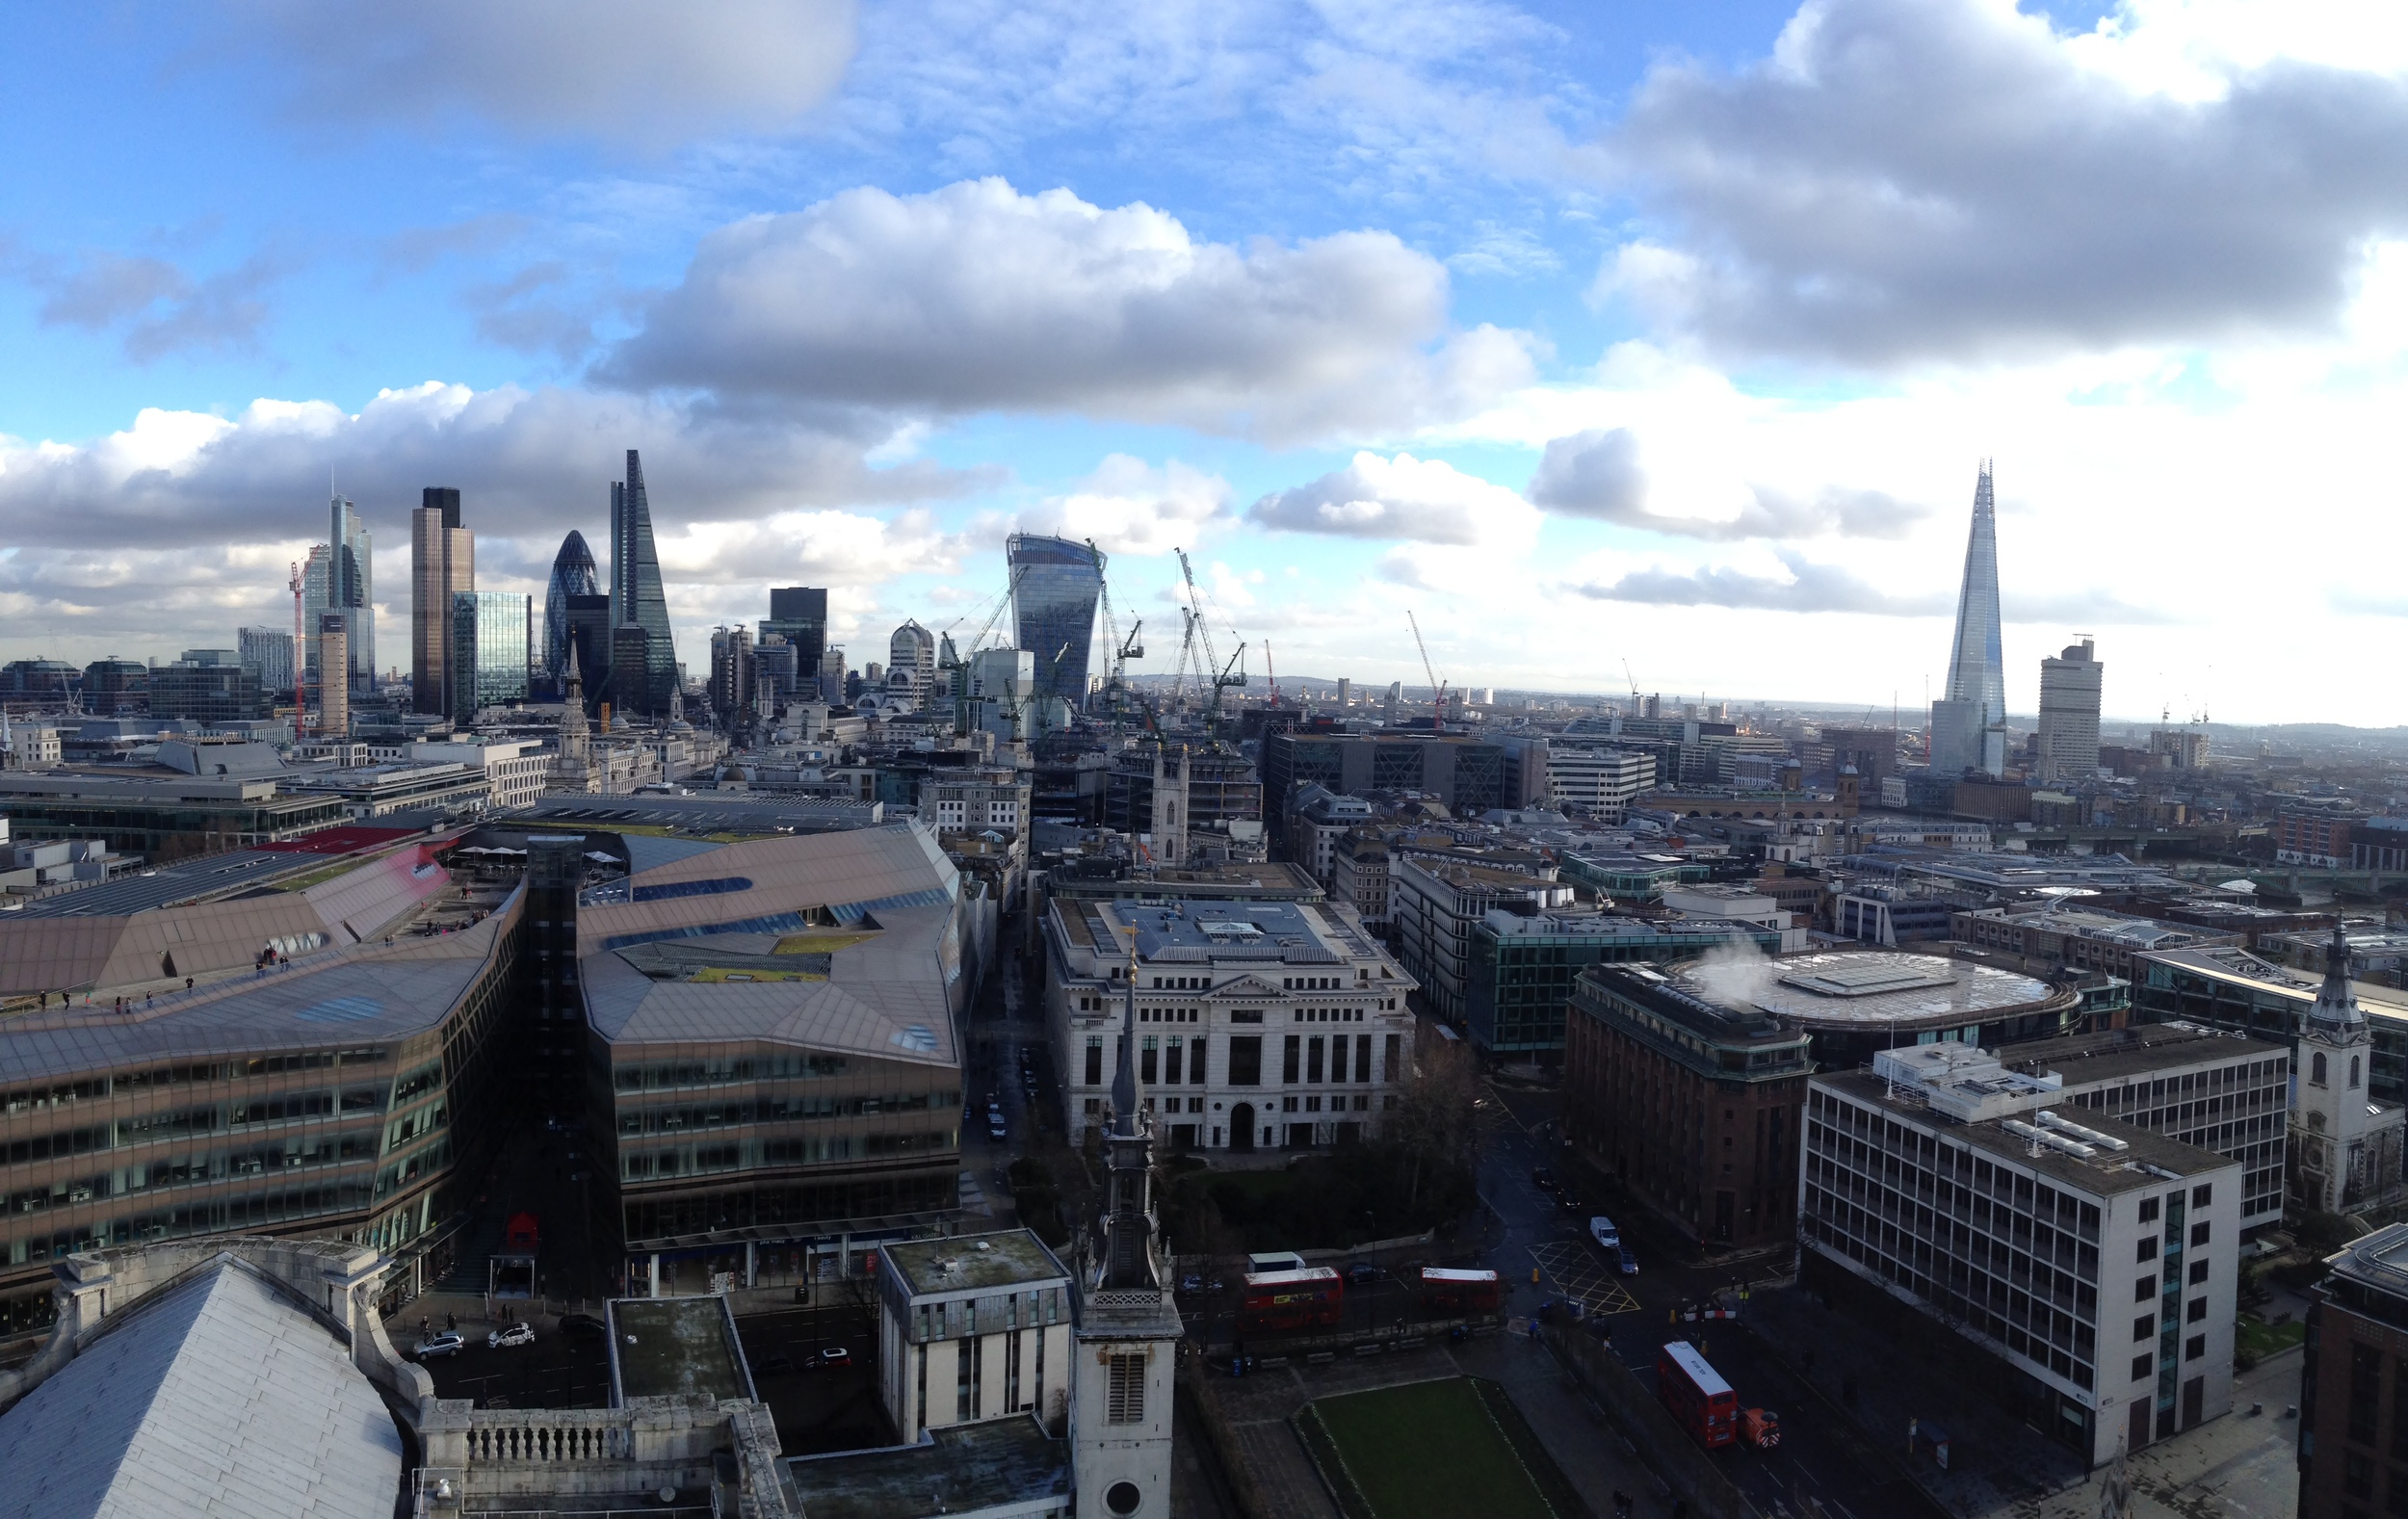 View from the top of St. Paul's - London, UK